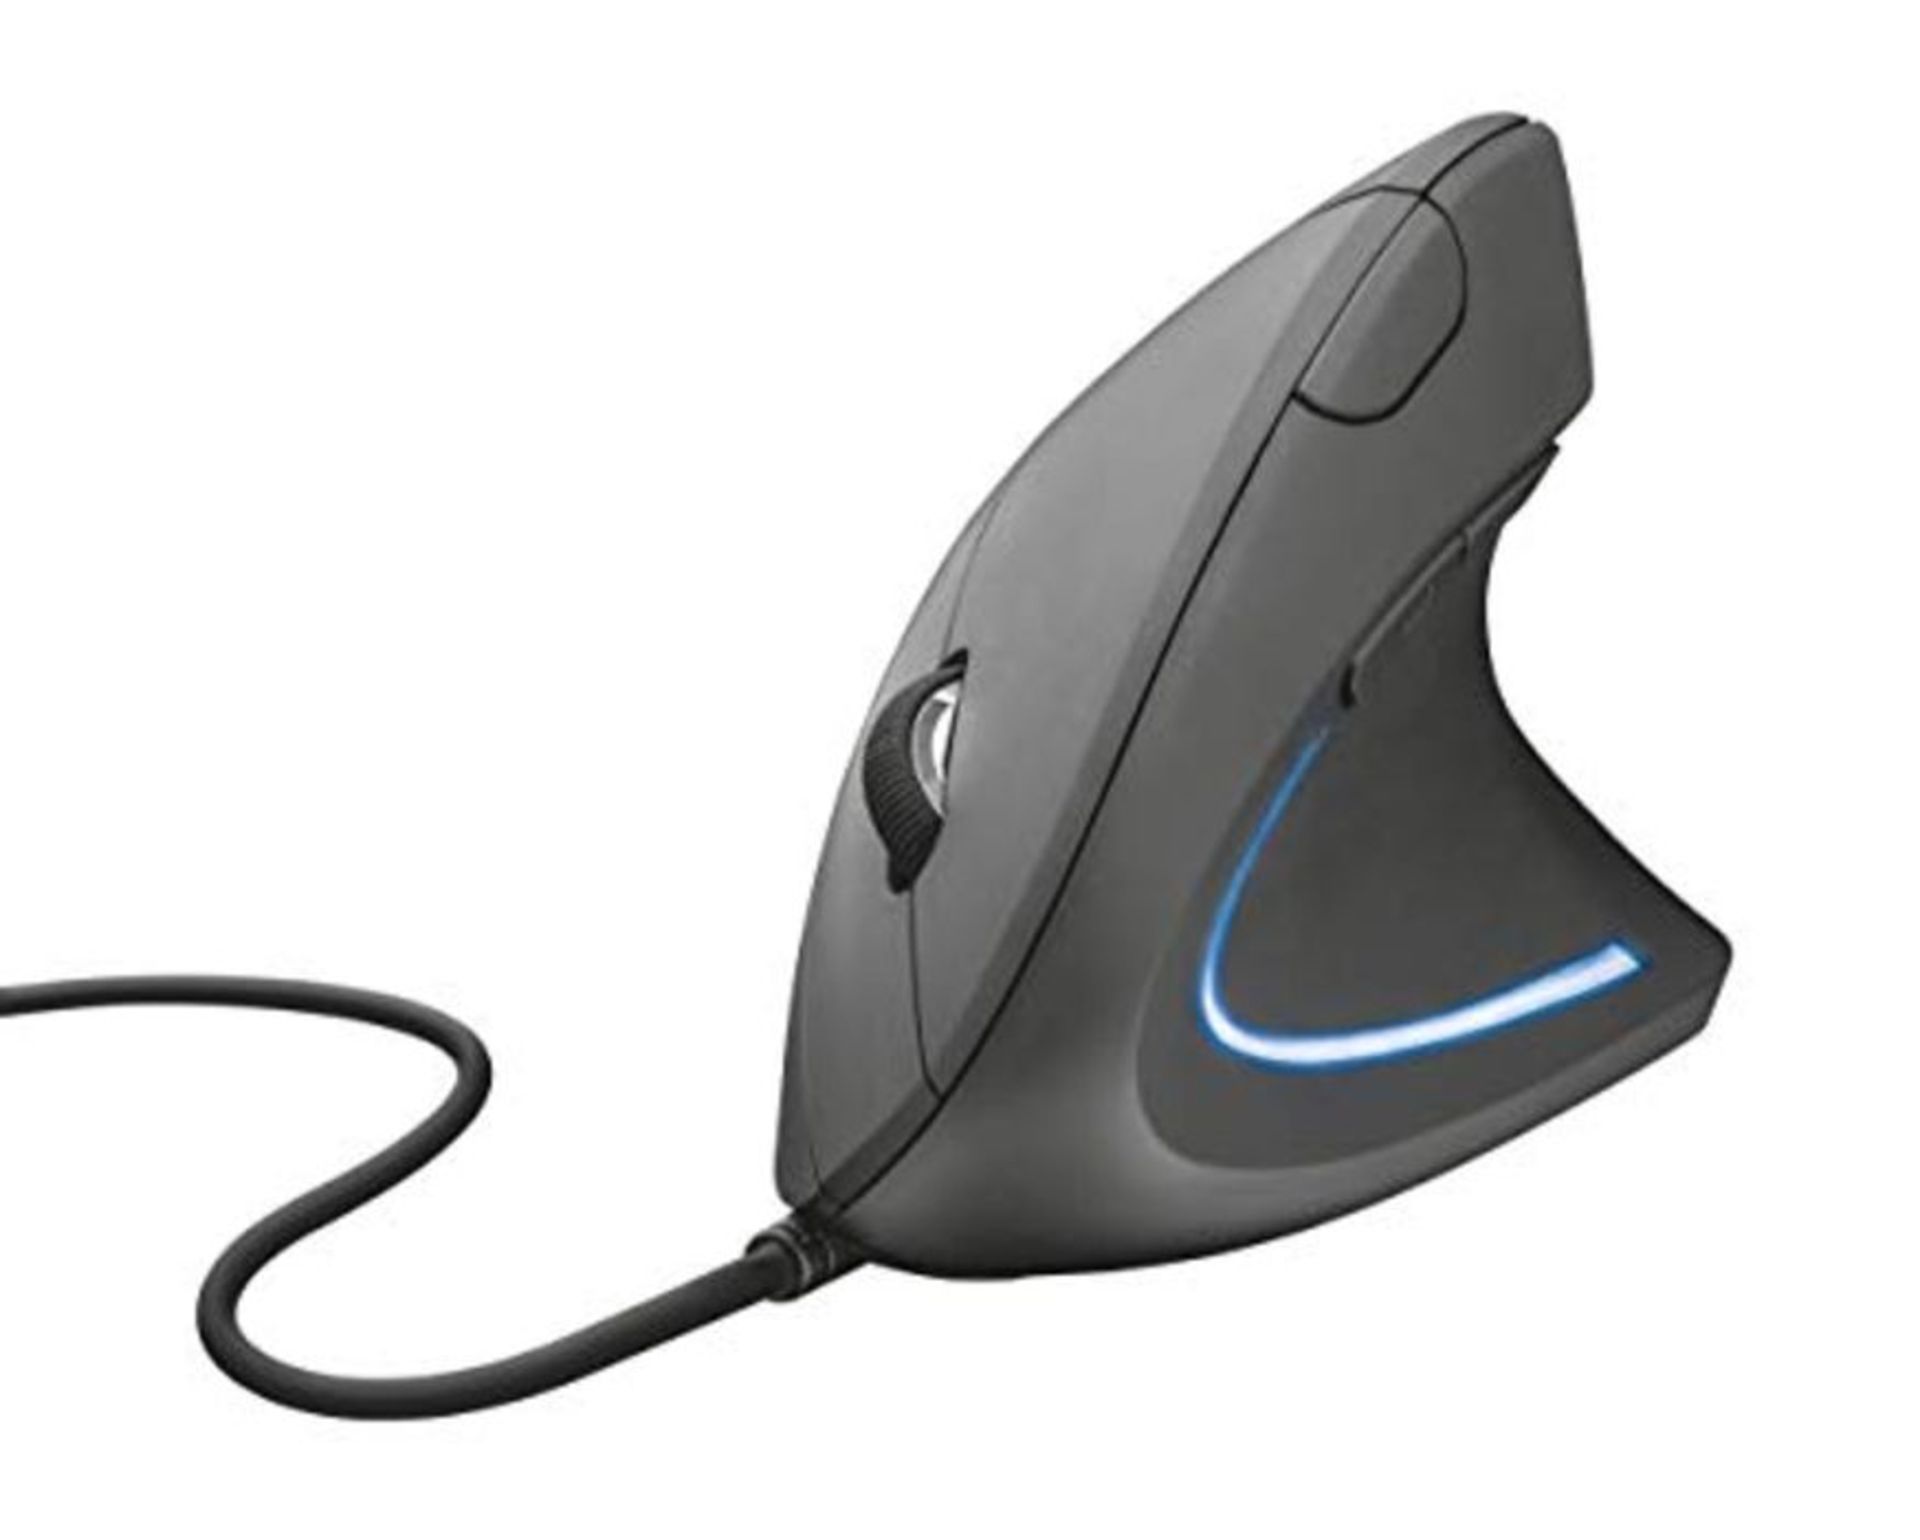 Trust 22885 Verto Wired Ergonomic Mouse for PC and Laptop, Illuminated, 1000-1600 DPI,